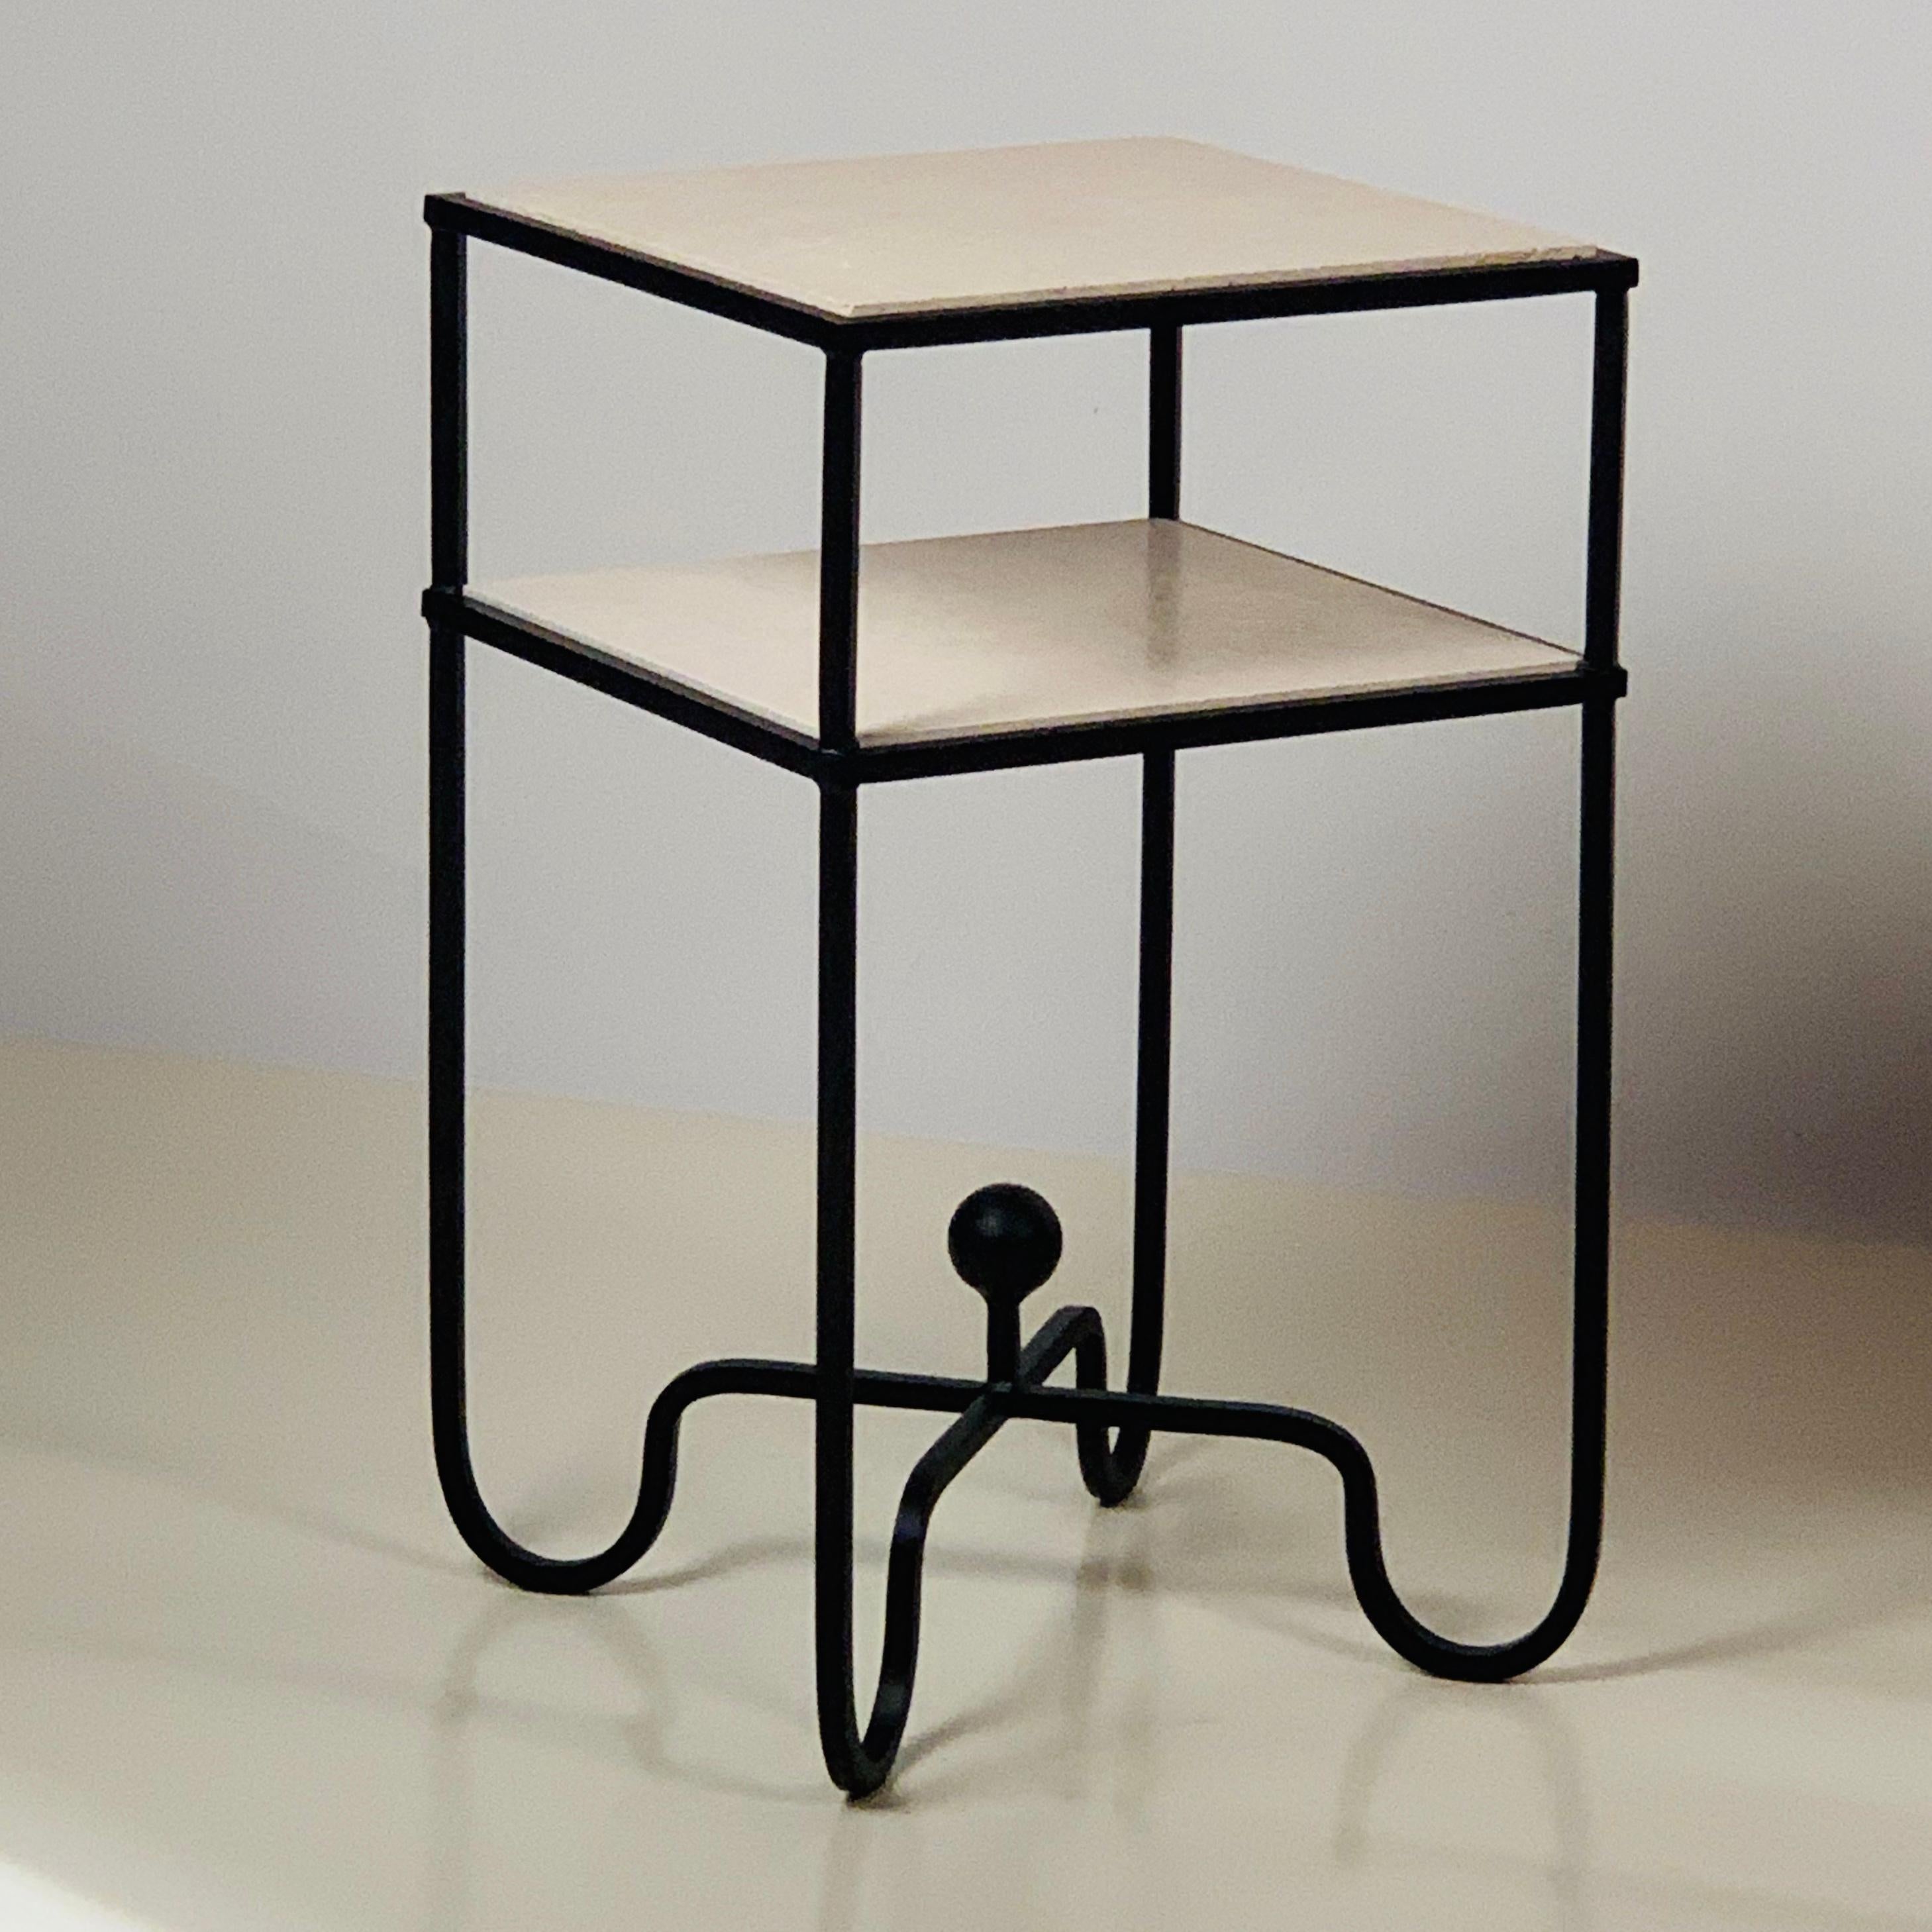 Pair of 2-Tier Entretoise Side Tables by Design Frères For Sale 5